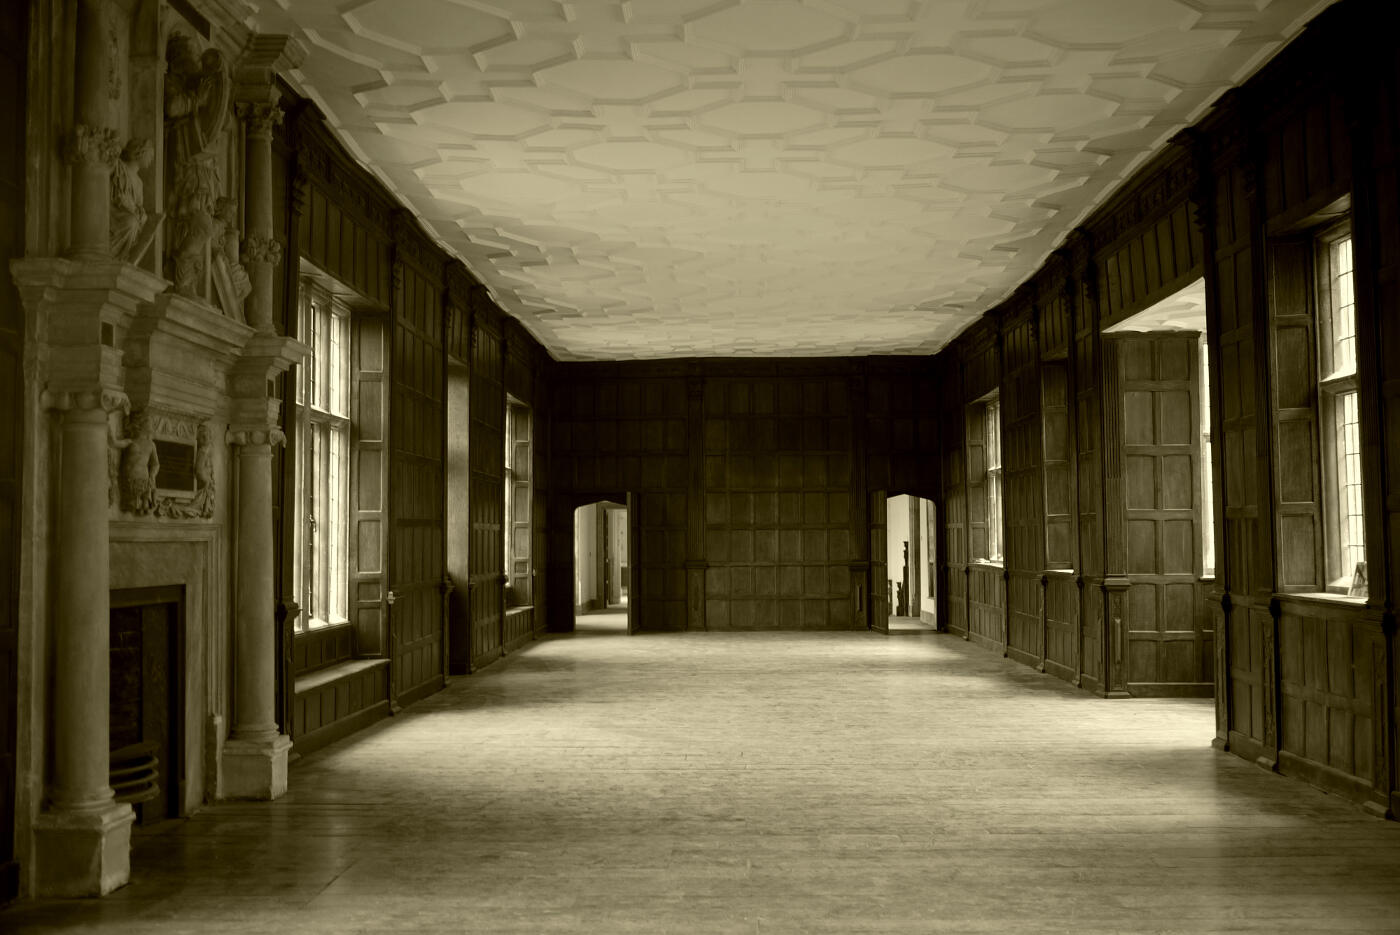 Interior of panelled, unfurnished room with large marble mantelpiece at Apethorpe Palace.